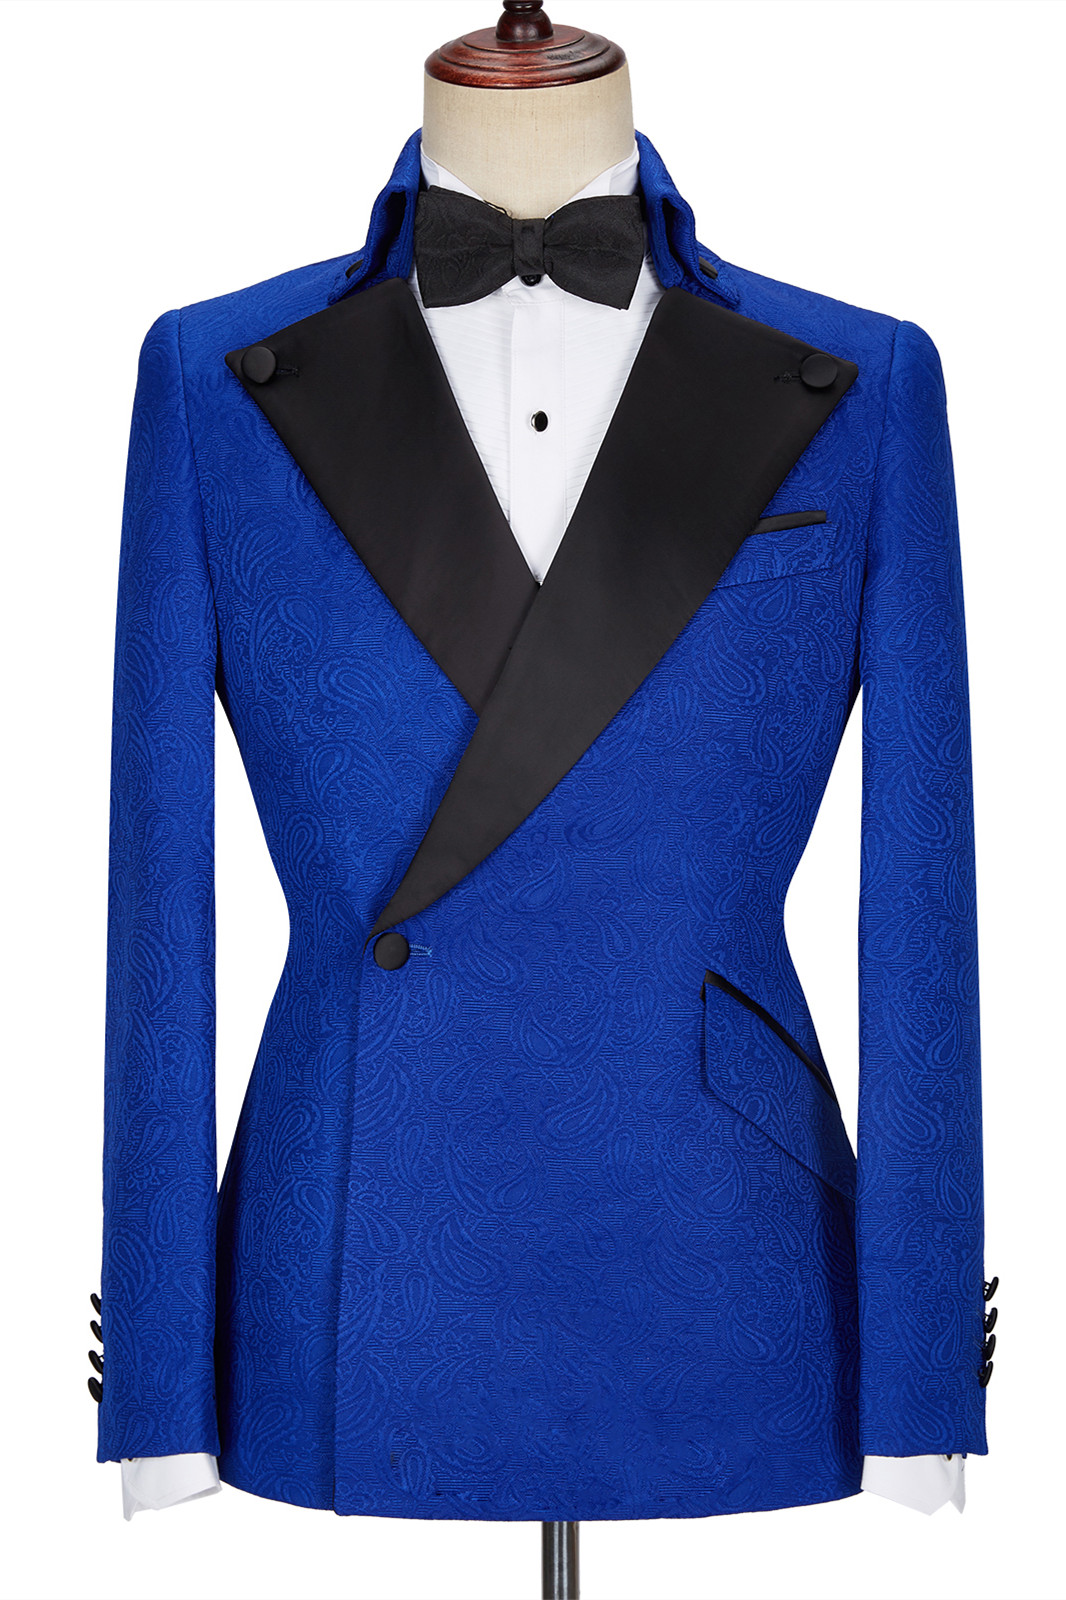 Bellasprom Royal Blue Jacquard Wedding Suits with Black Lapel Bellasprom